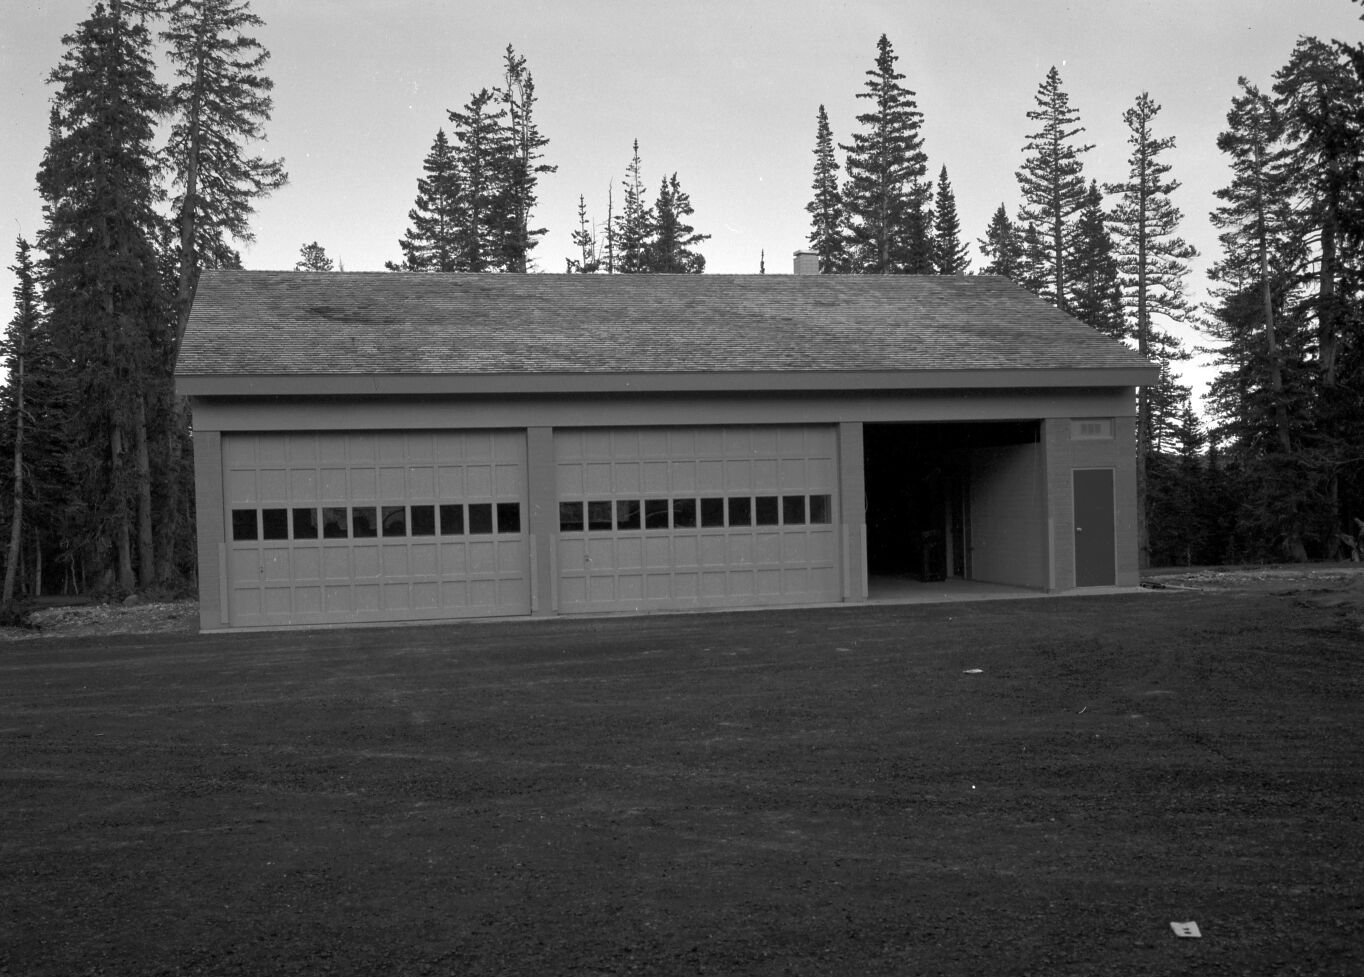 The utility and maintenance building after completion of construction.